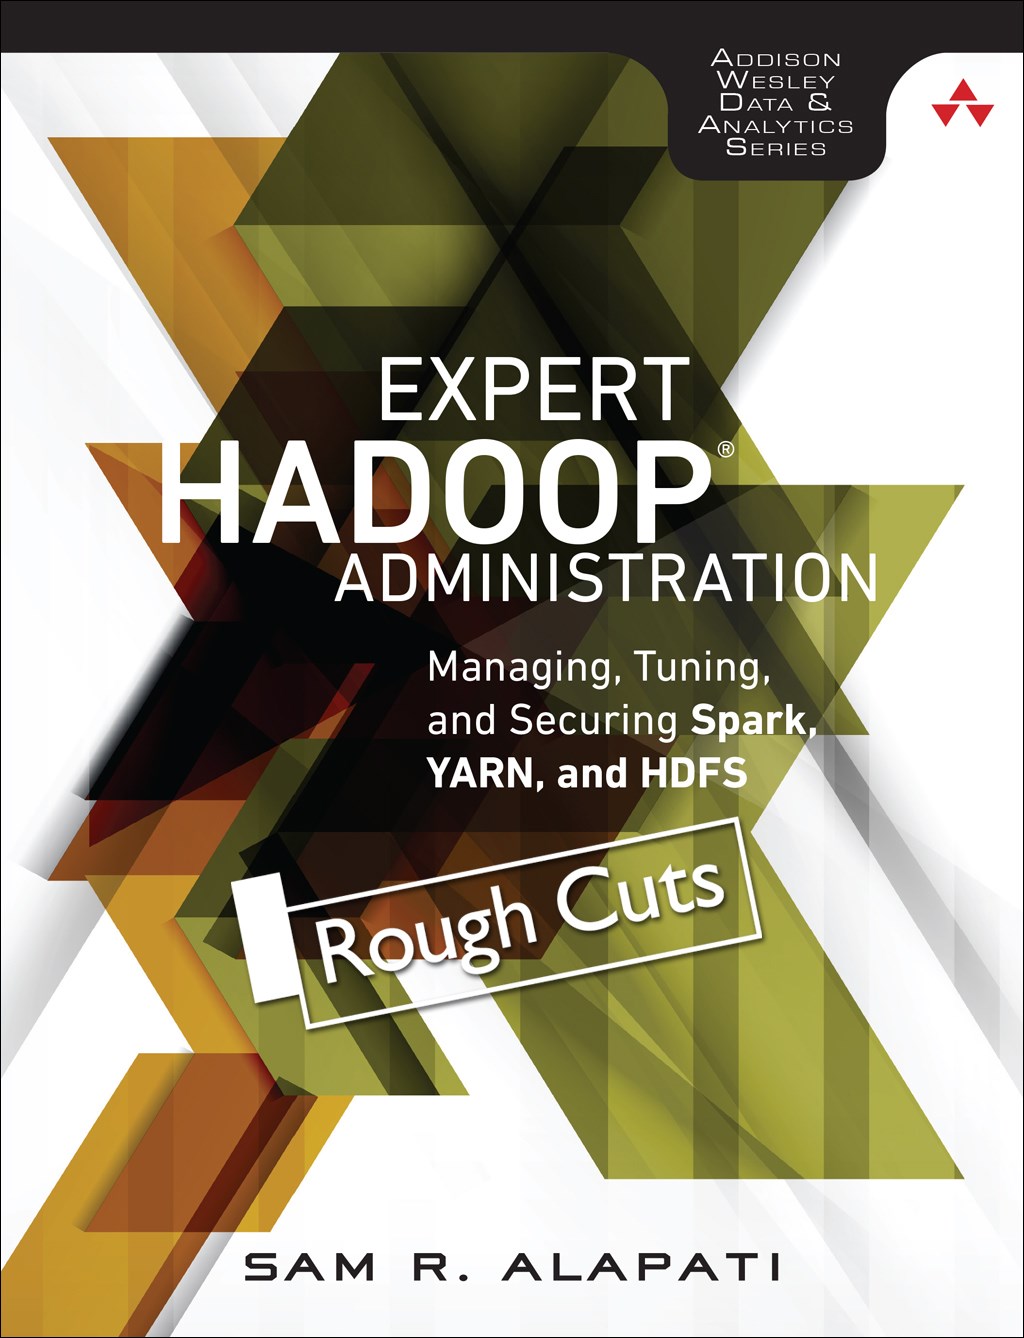 Expert Hadoop Administration: Managing, Tuning, and Securing Spark, YARN, and HDFS, Rough Cuts